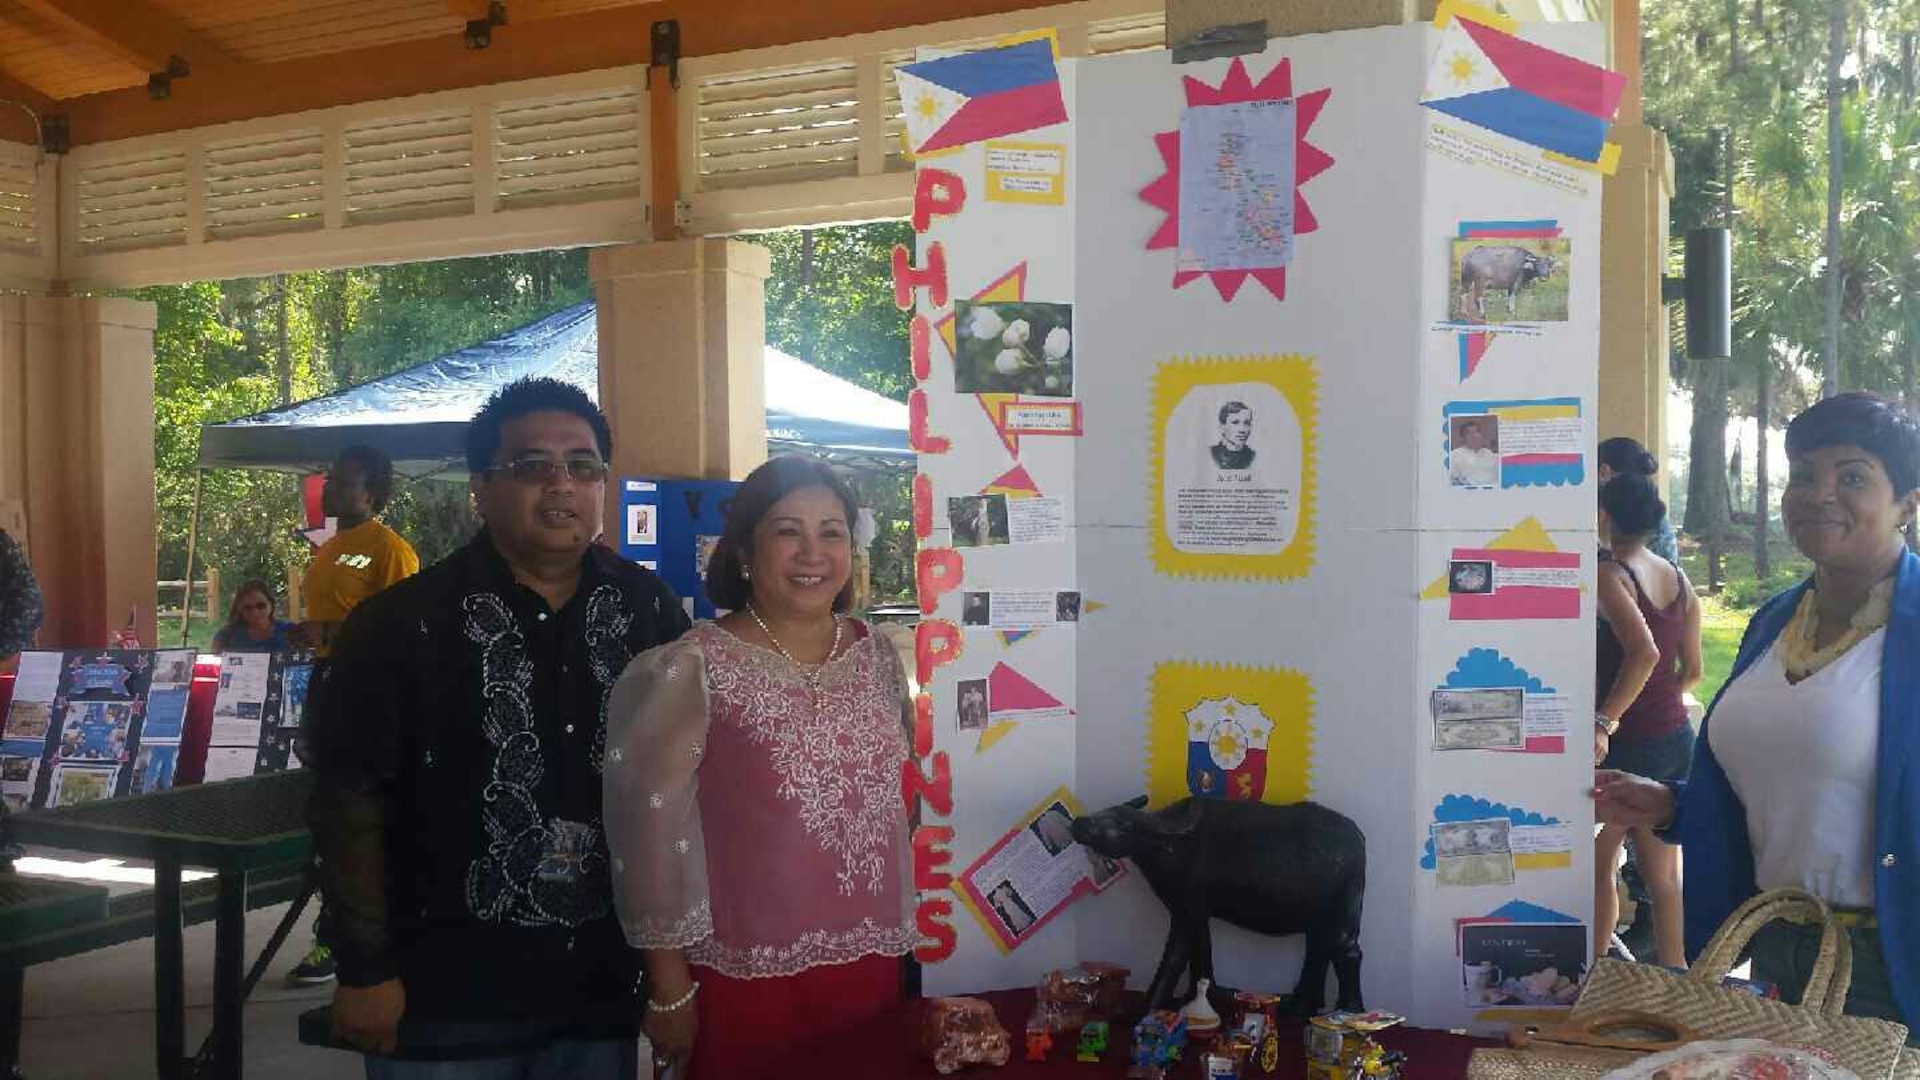 On July 22, 2015 Employees at Defense Logistics Agency Aviation at Jacksonville, Florida participate in the Naval Air Station (NAS) Jacksonville's “Multicultural Fun Day" at the base's marina pavilion. (Left to right) Lead Customer Support Specialist Noel Magsakay, Sustainment Specialist Melinda Caliolio, and Administrative Support Assistant (contractor) Denise Cummings, all from DLA Aviation at Jacksonville, attend a display highlighting the Philippines and Filipino culture. 